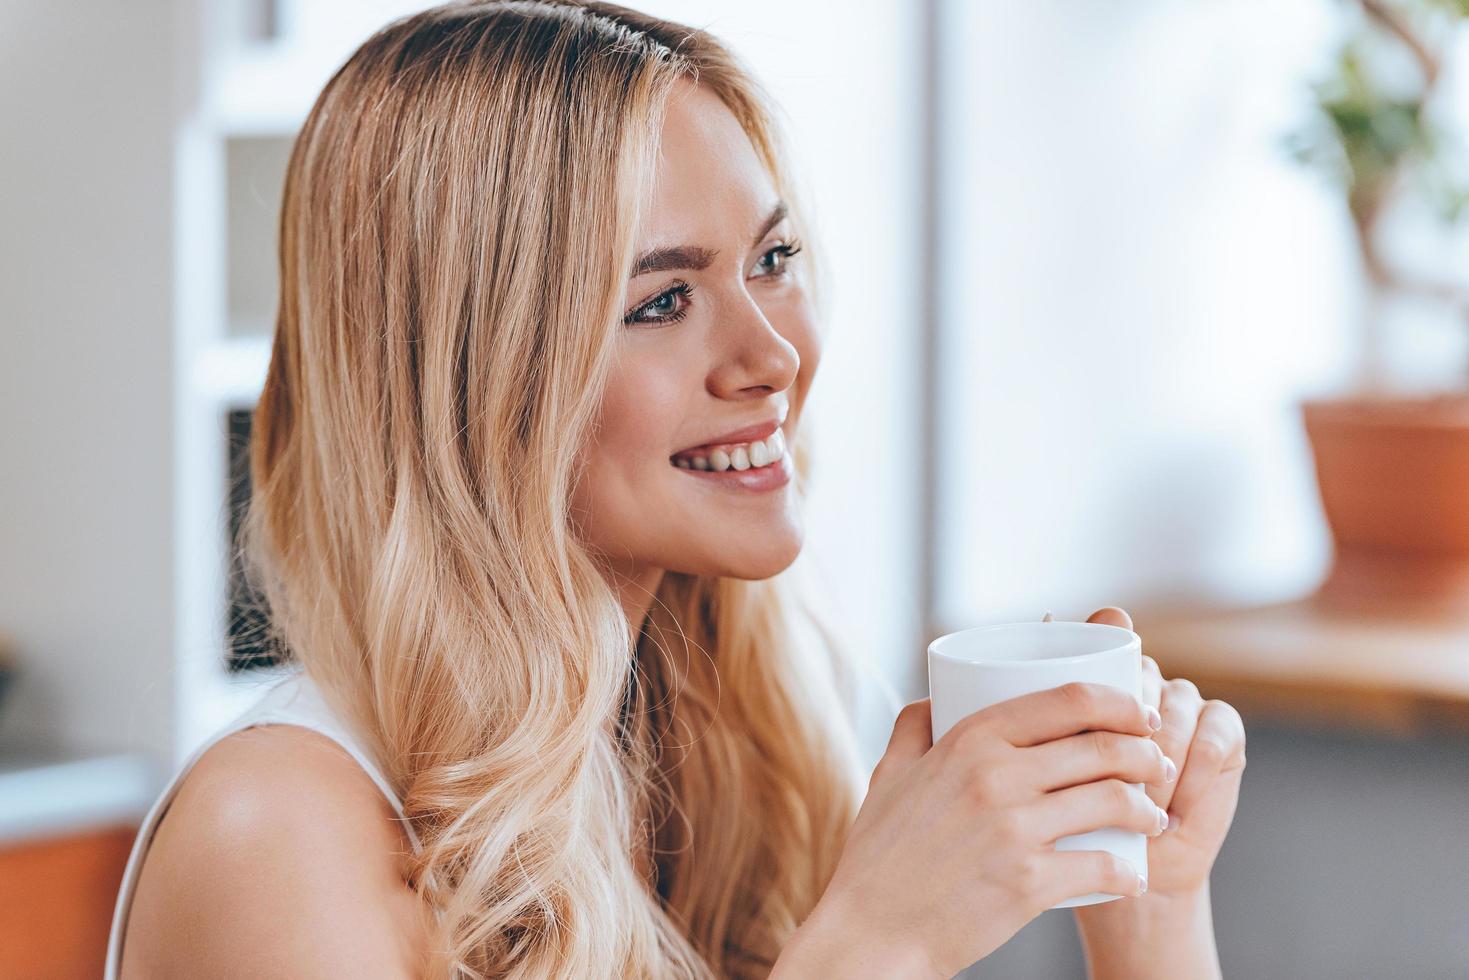 Smiling beauty. Close-up side view of beautiful cheerful young woman holding coffee cup and looking away with smile while sitting at the kitchen at home photo